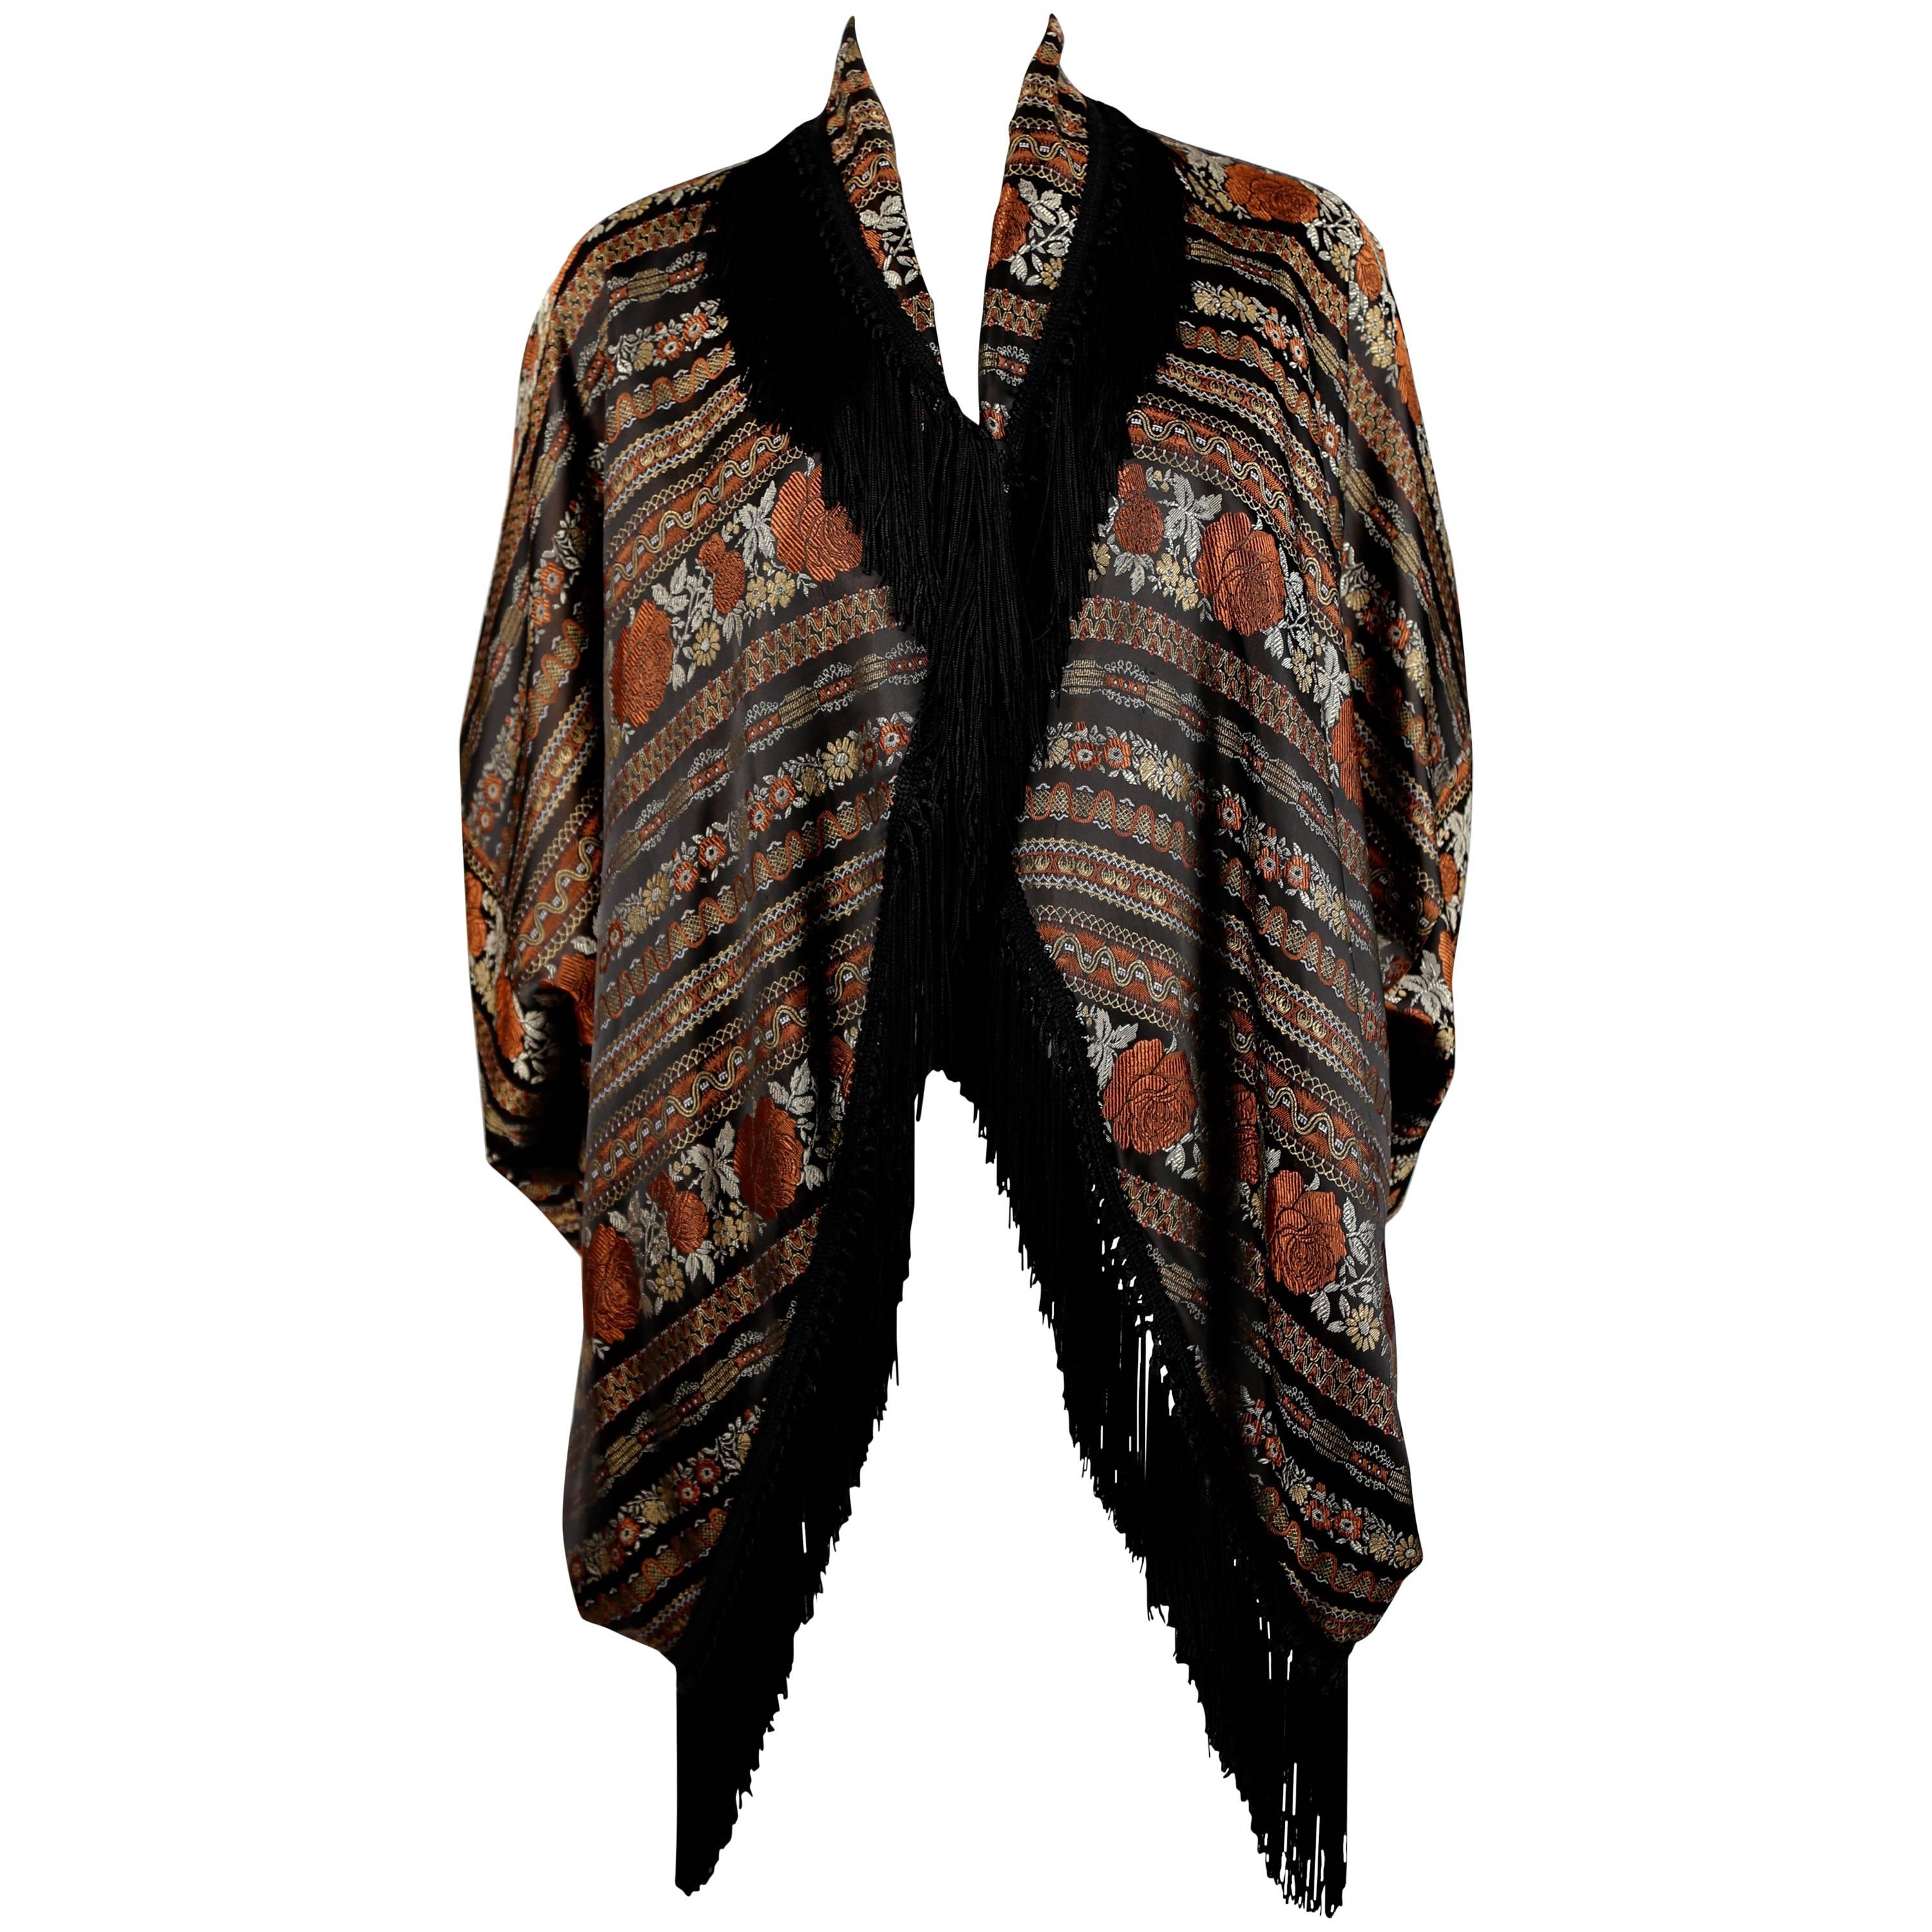 ROMEO GIGLI for CALLAGHAN draped jacket with fringe